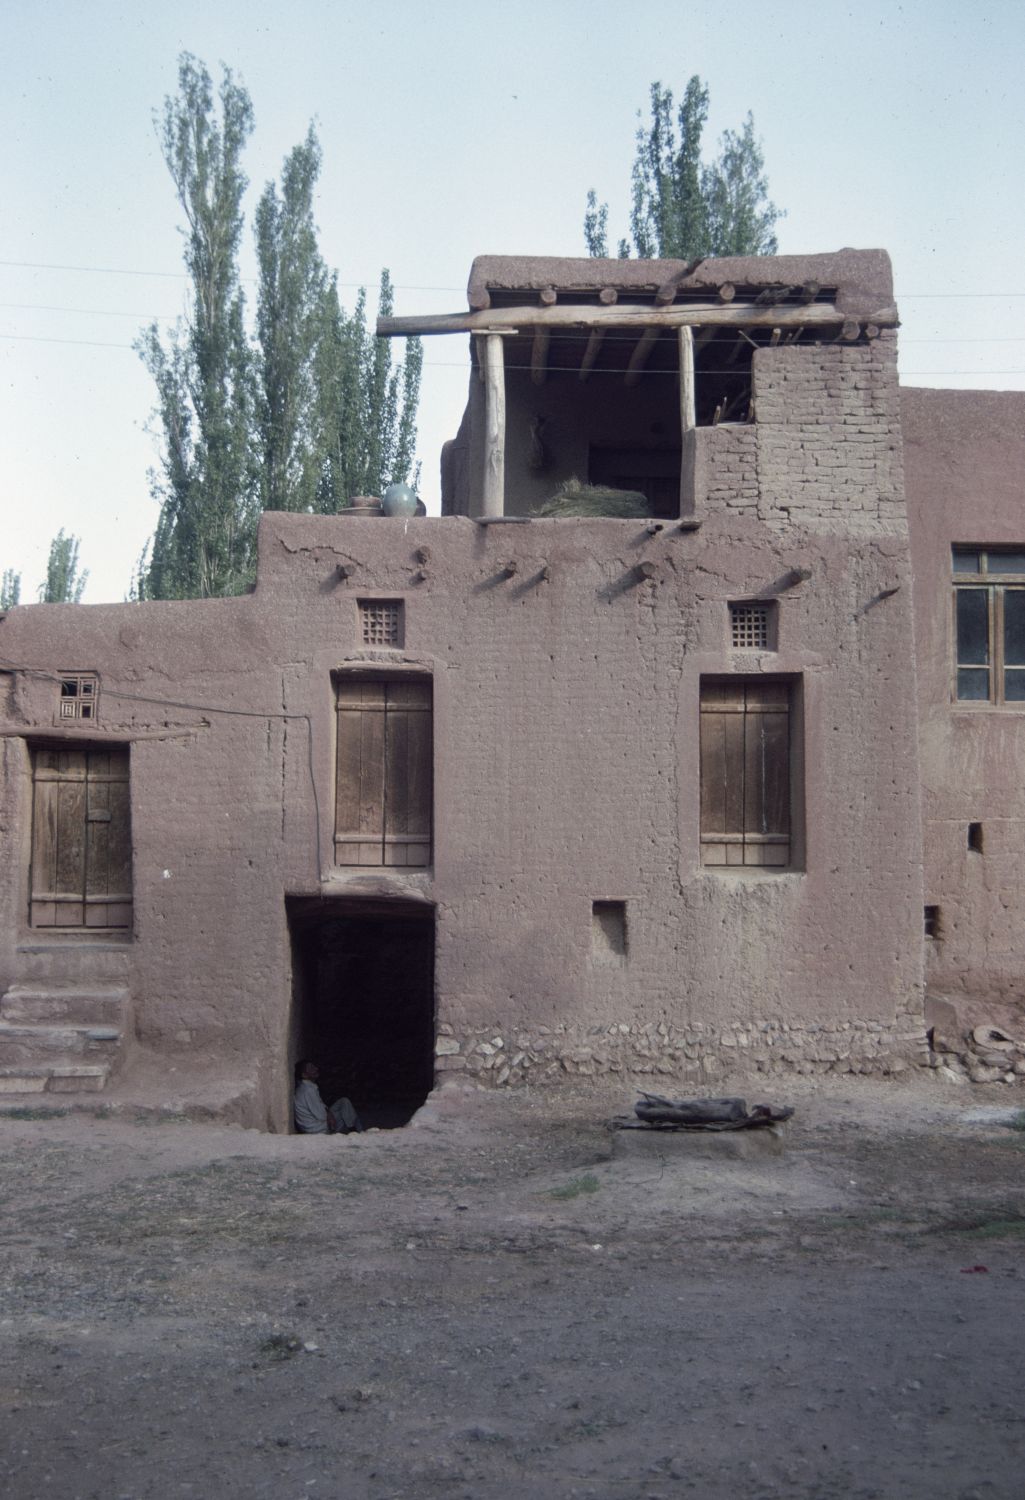 Abyanah  - View of a traditional house in Abyanah, Iran.